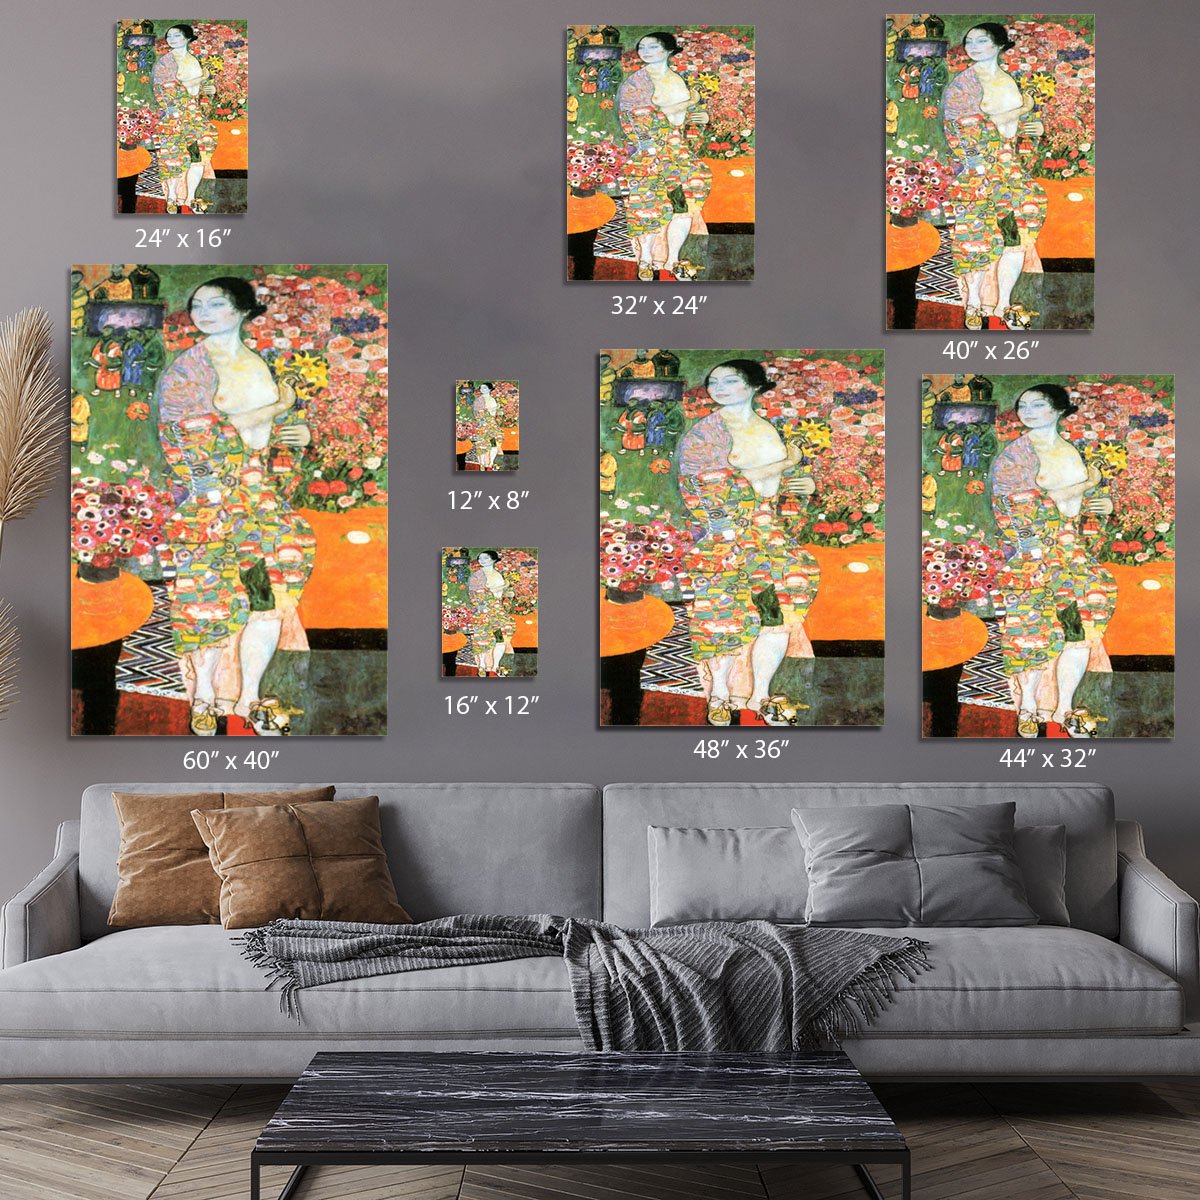 The dancer by Klimt Canvas Print or Poster